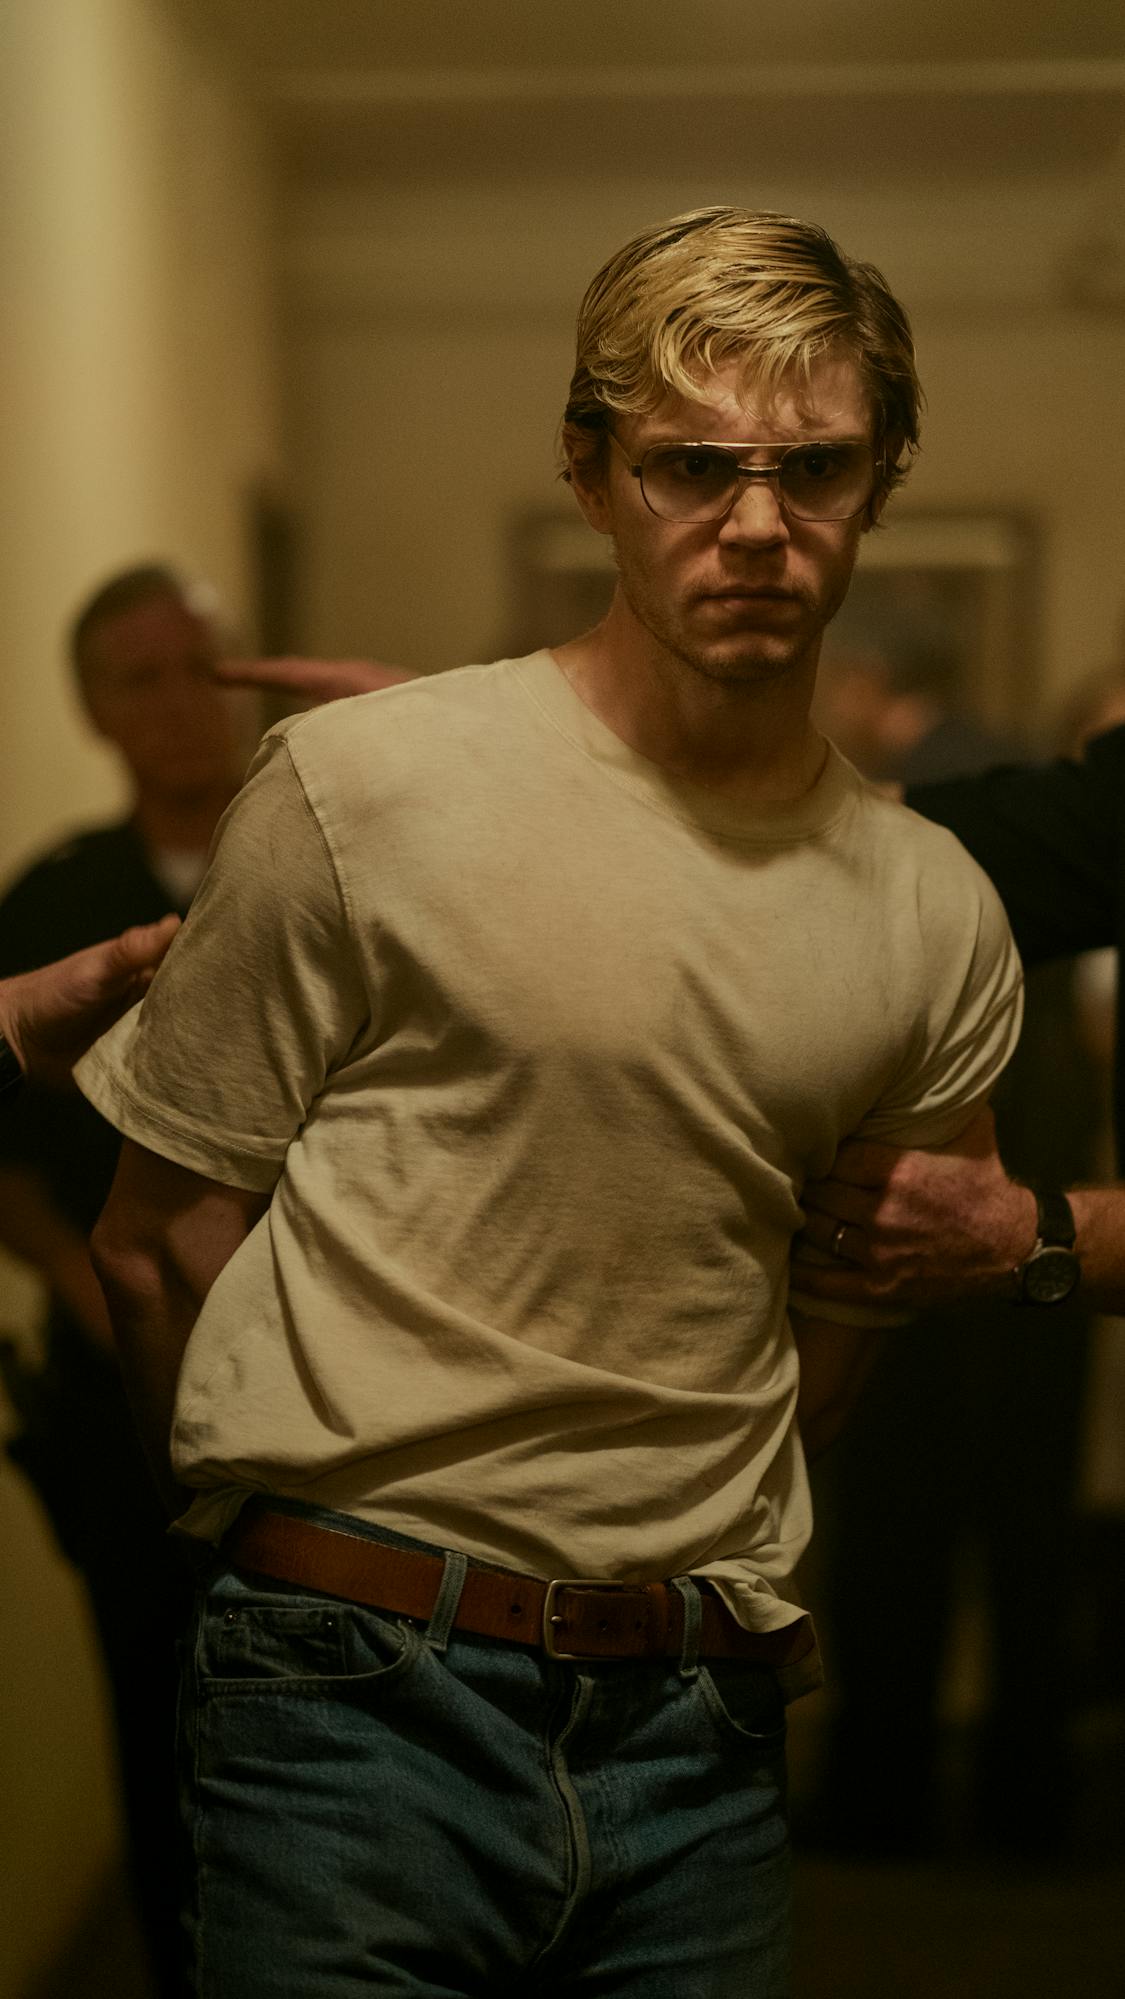 Jeffrey Dahmer (Evan Peters) wears a white top and is escorted by police officers.